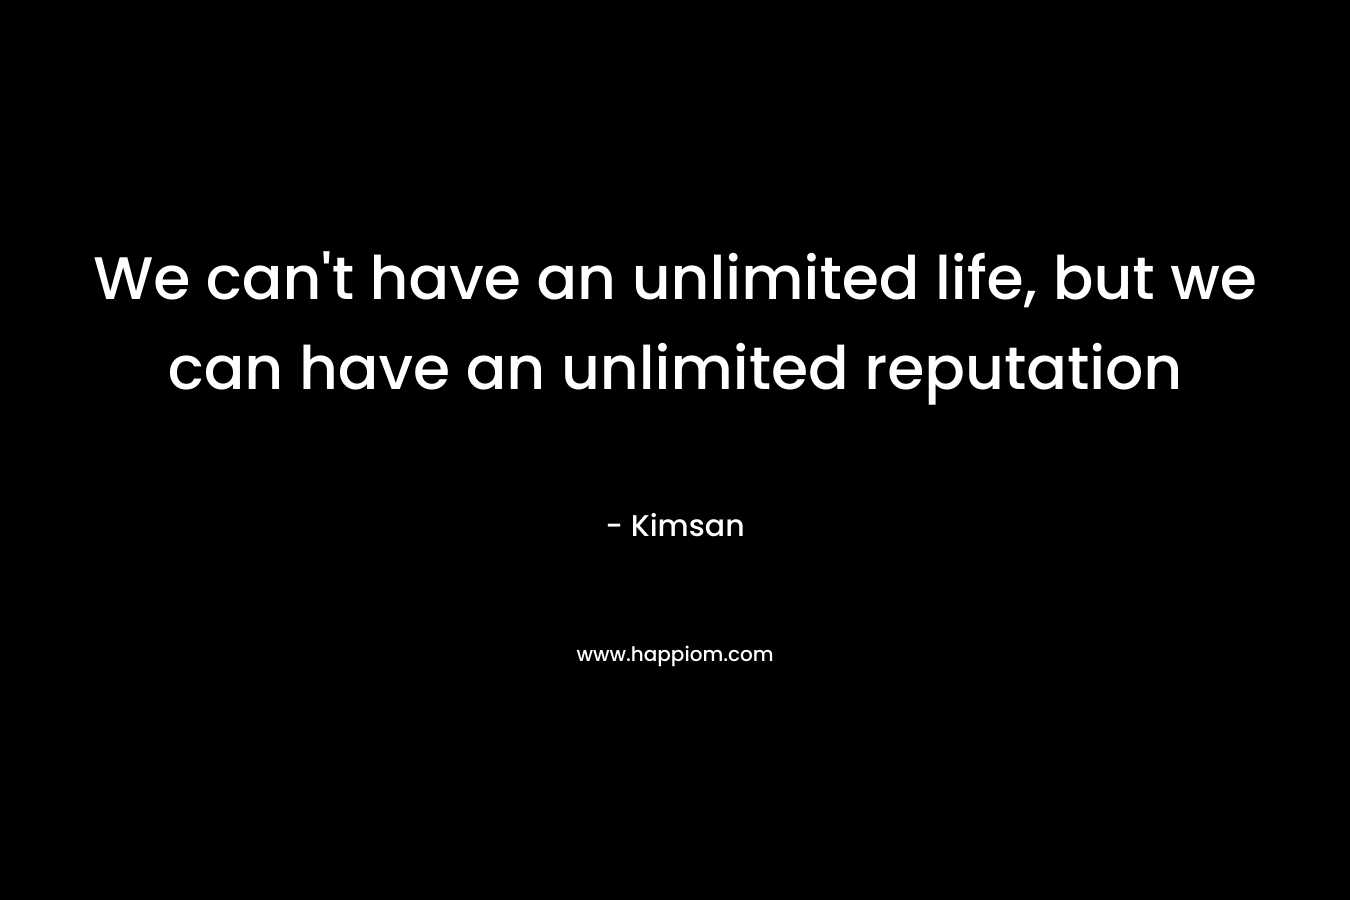 We can’t have an unlimited life, but we can have an unlimited reputation – Kimsan